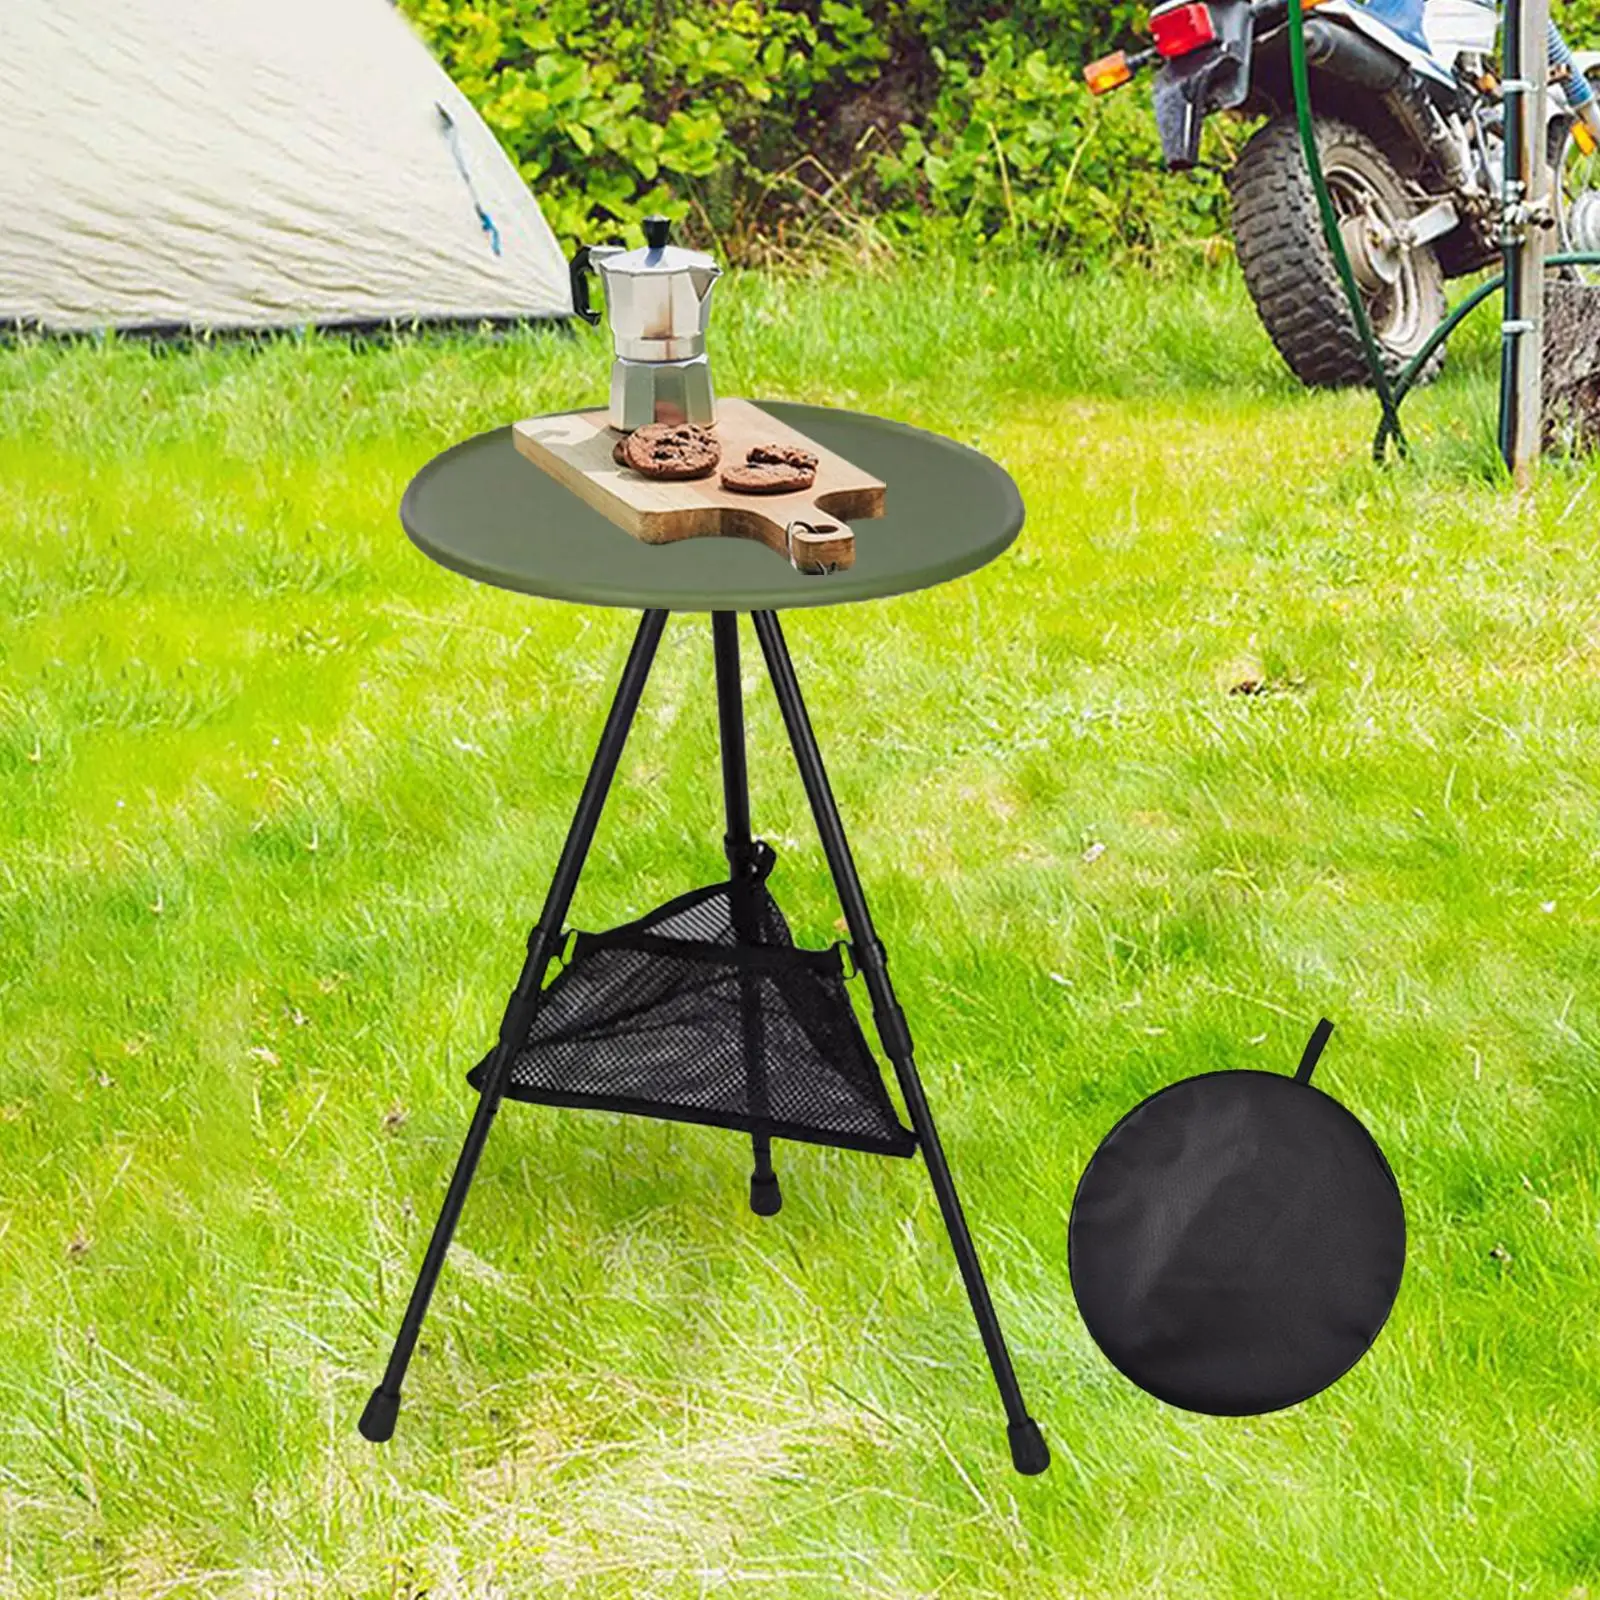 Foldable Picnic Table Coffee Tea Table Folding Camping Table Portable Ultralight Outdoor Round Table for Garden Cooking Barbecue